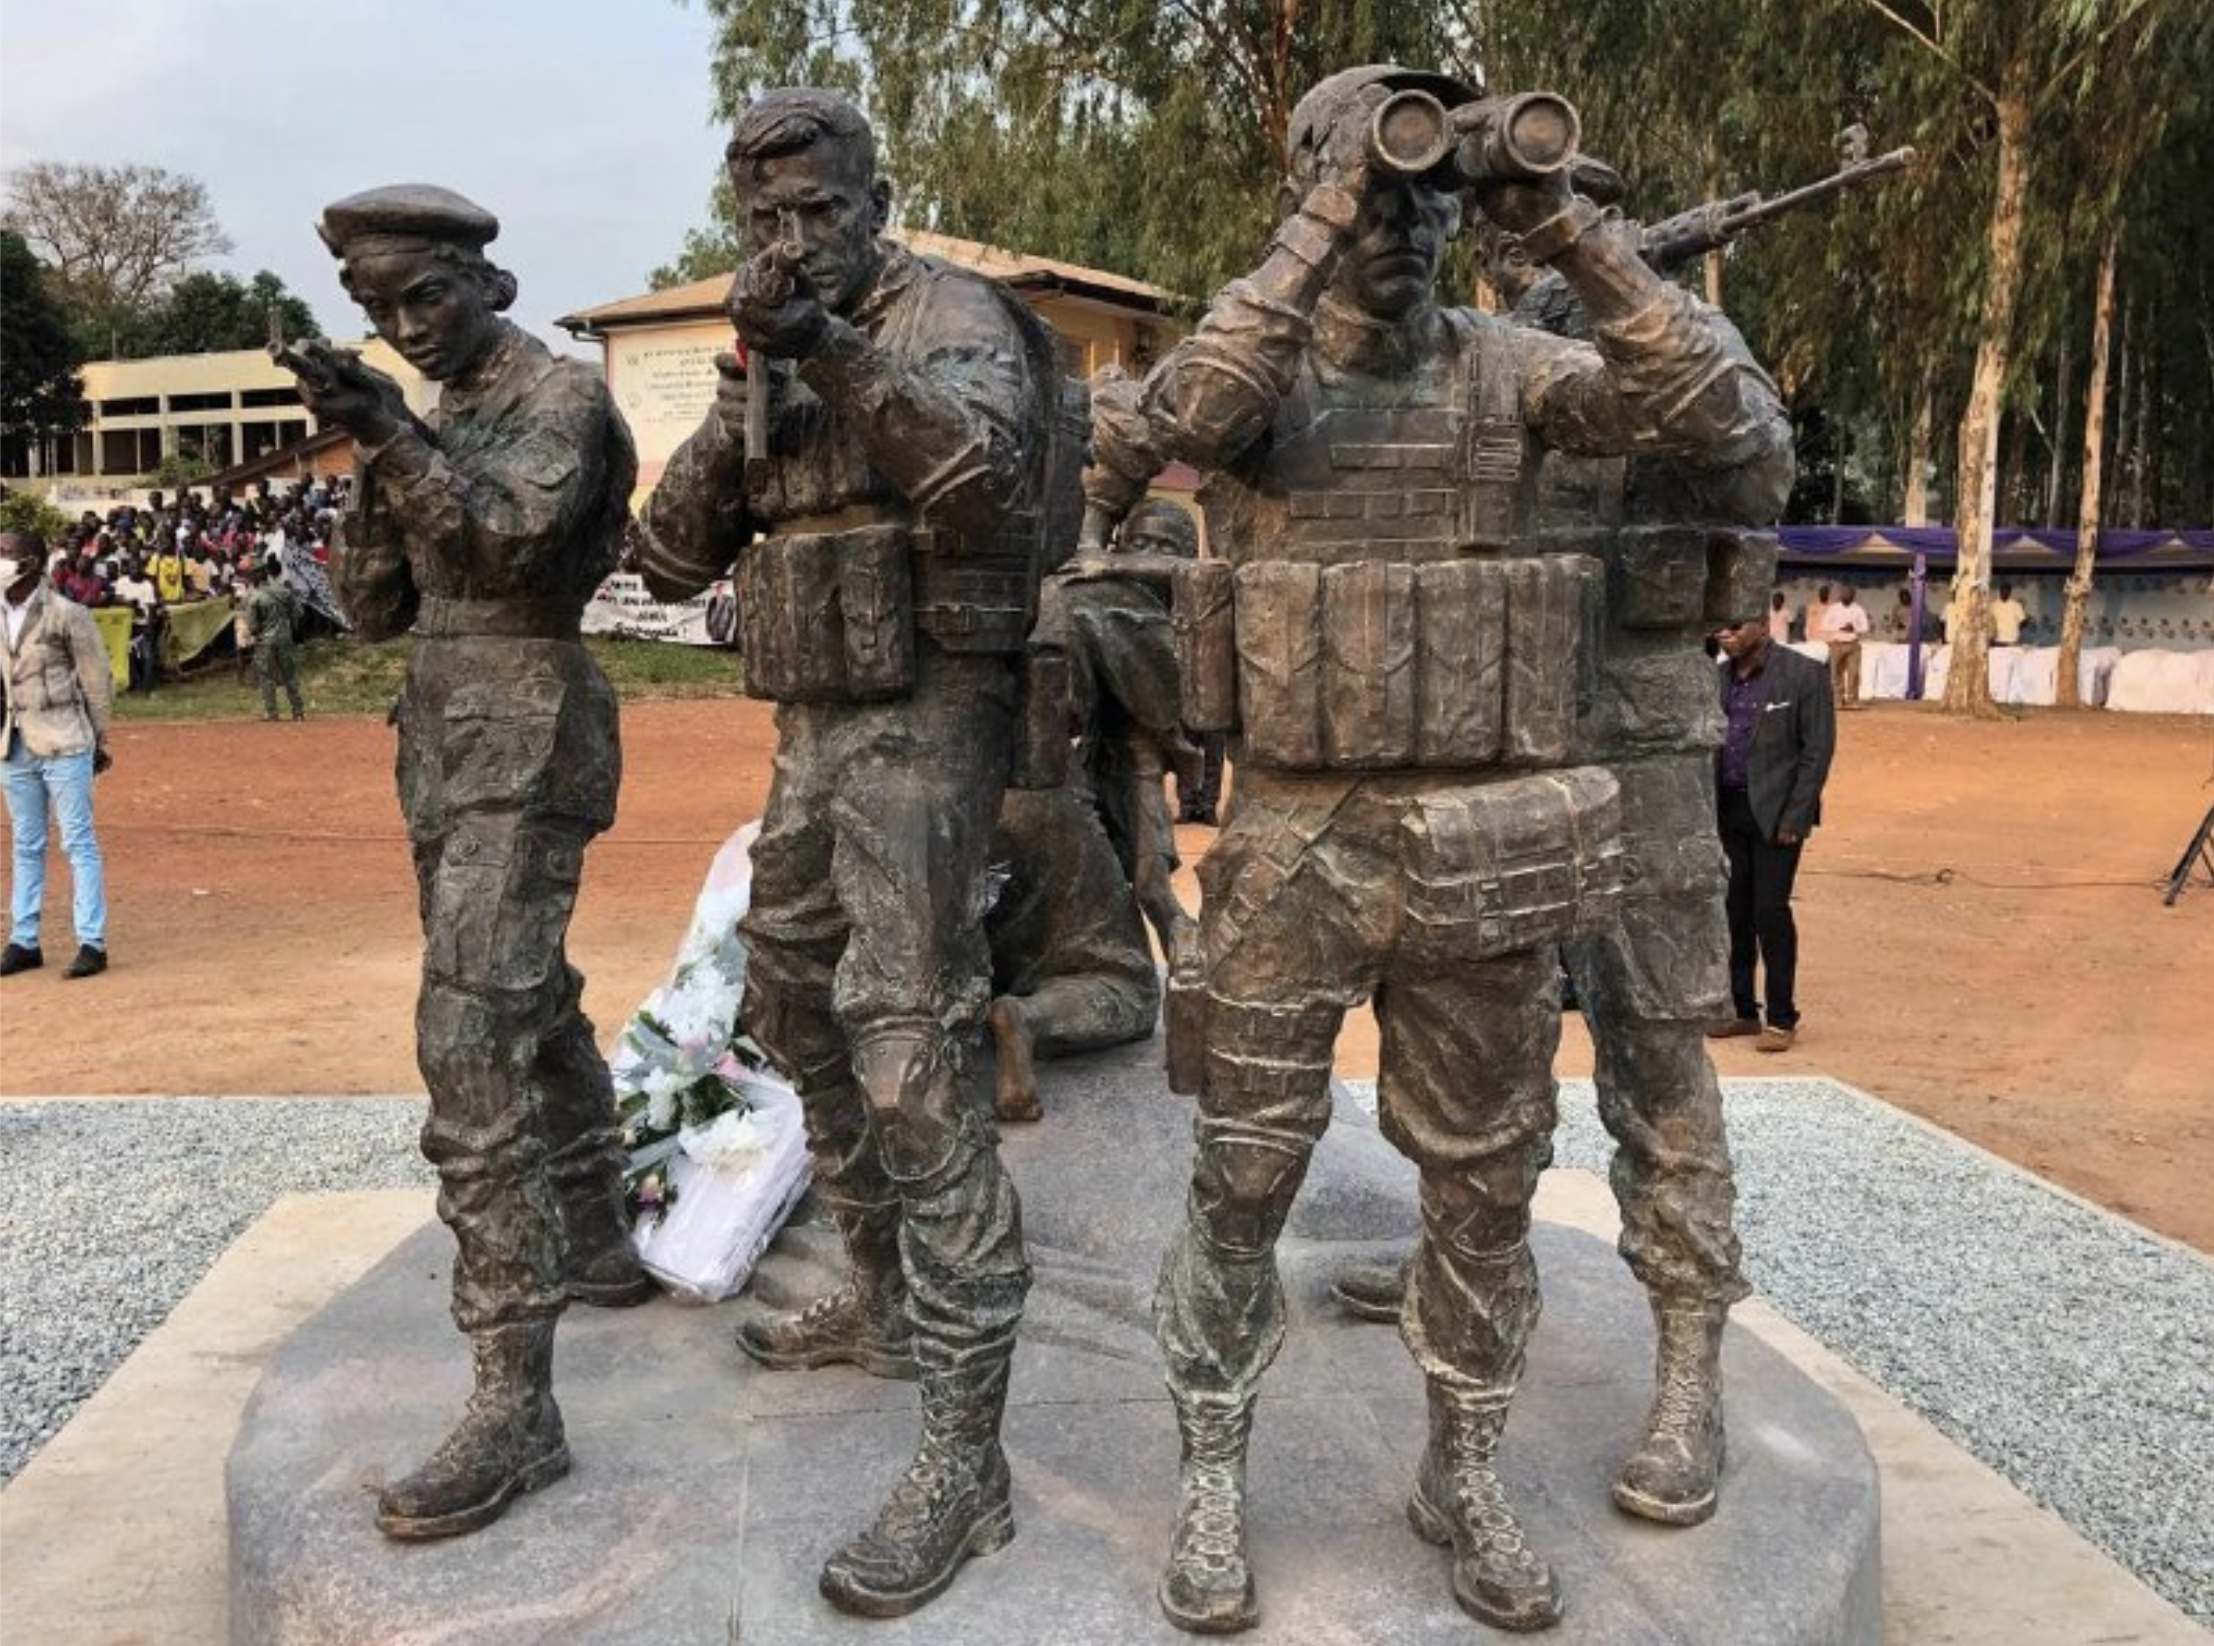 First Russian mercenary statue in Africa identified in the Central African Republic